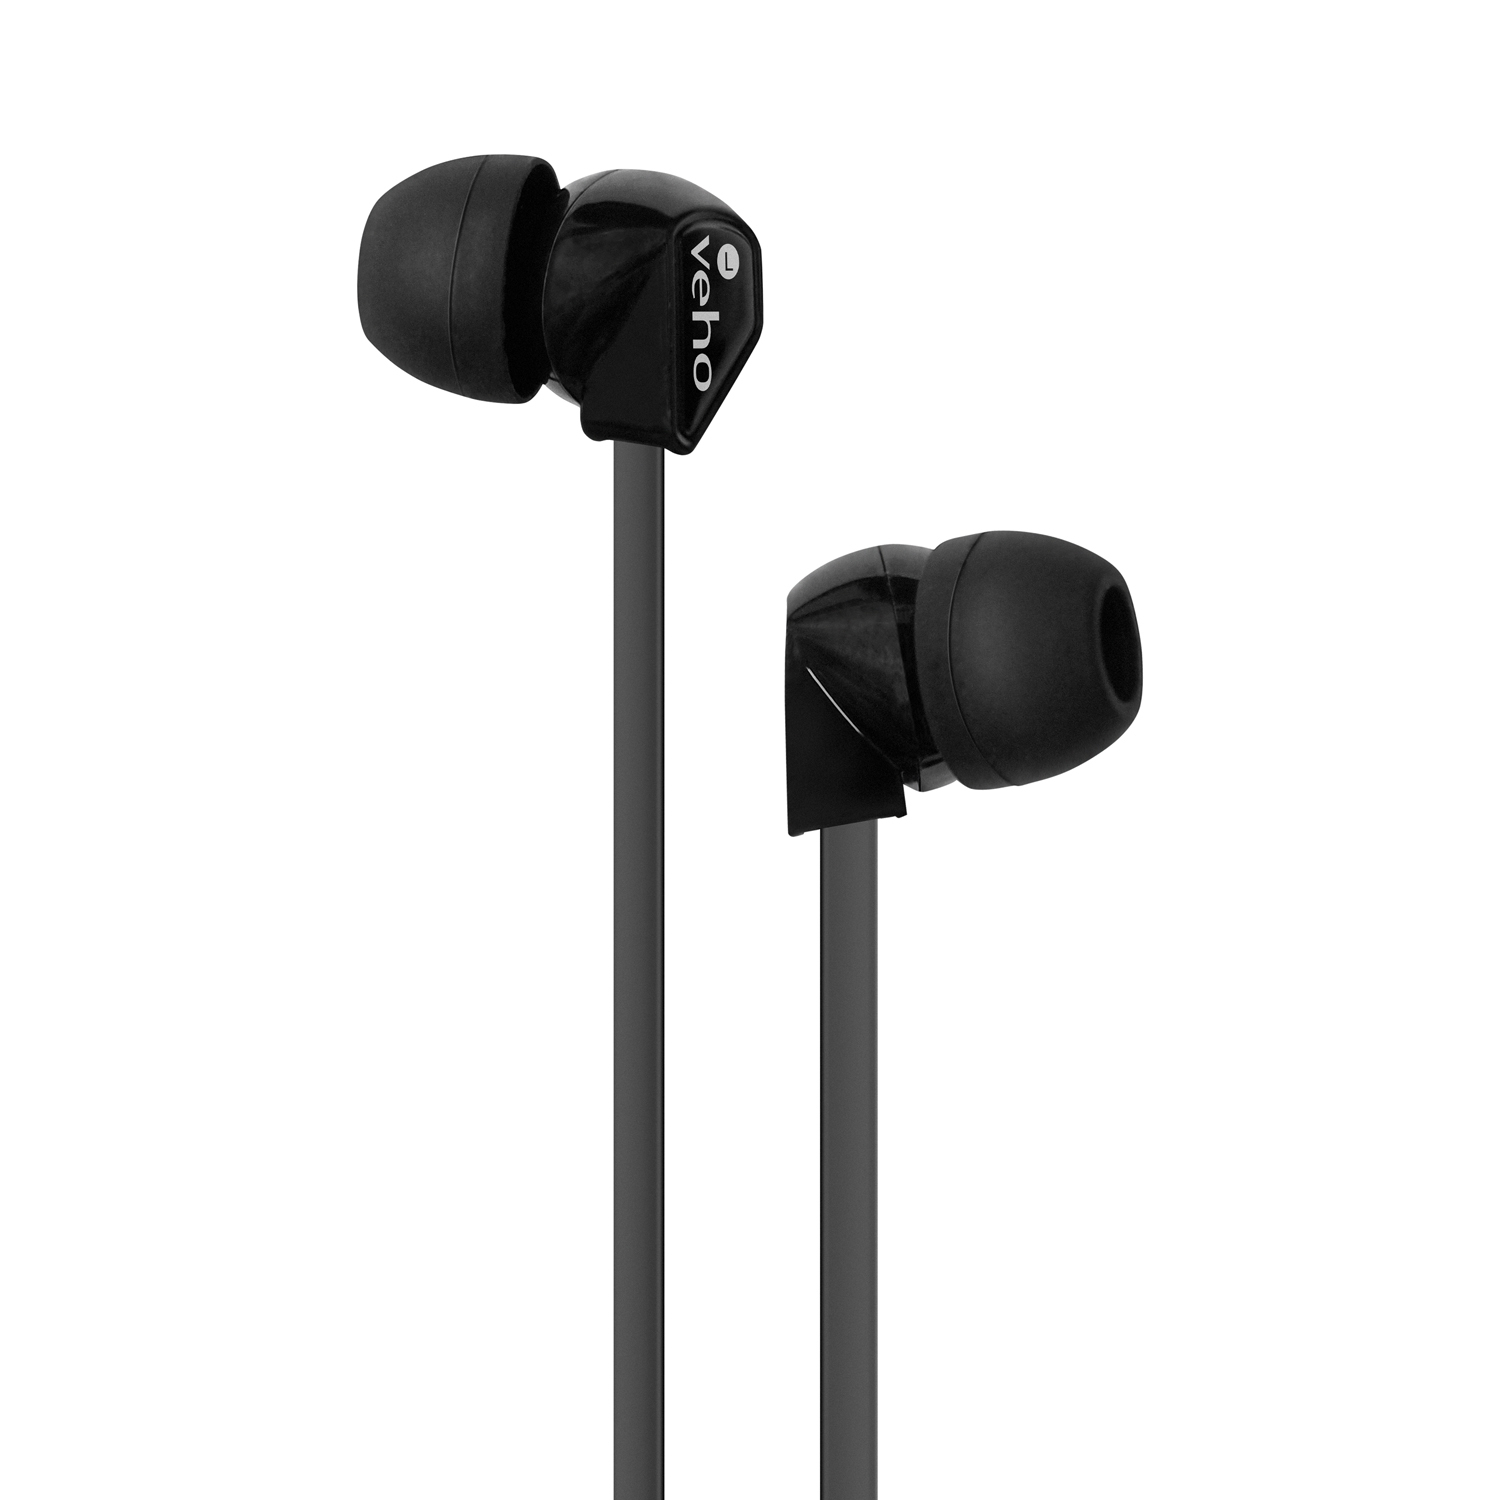 Veho VEP-003-Z1-G 360 Stereo Noise isolating Earphones with flex 'anti' tangle cord system